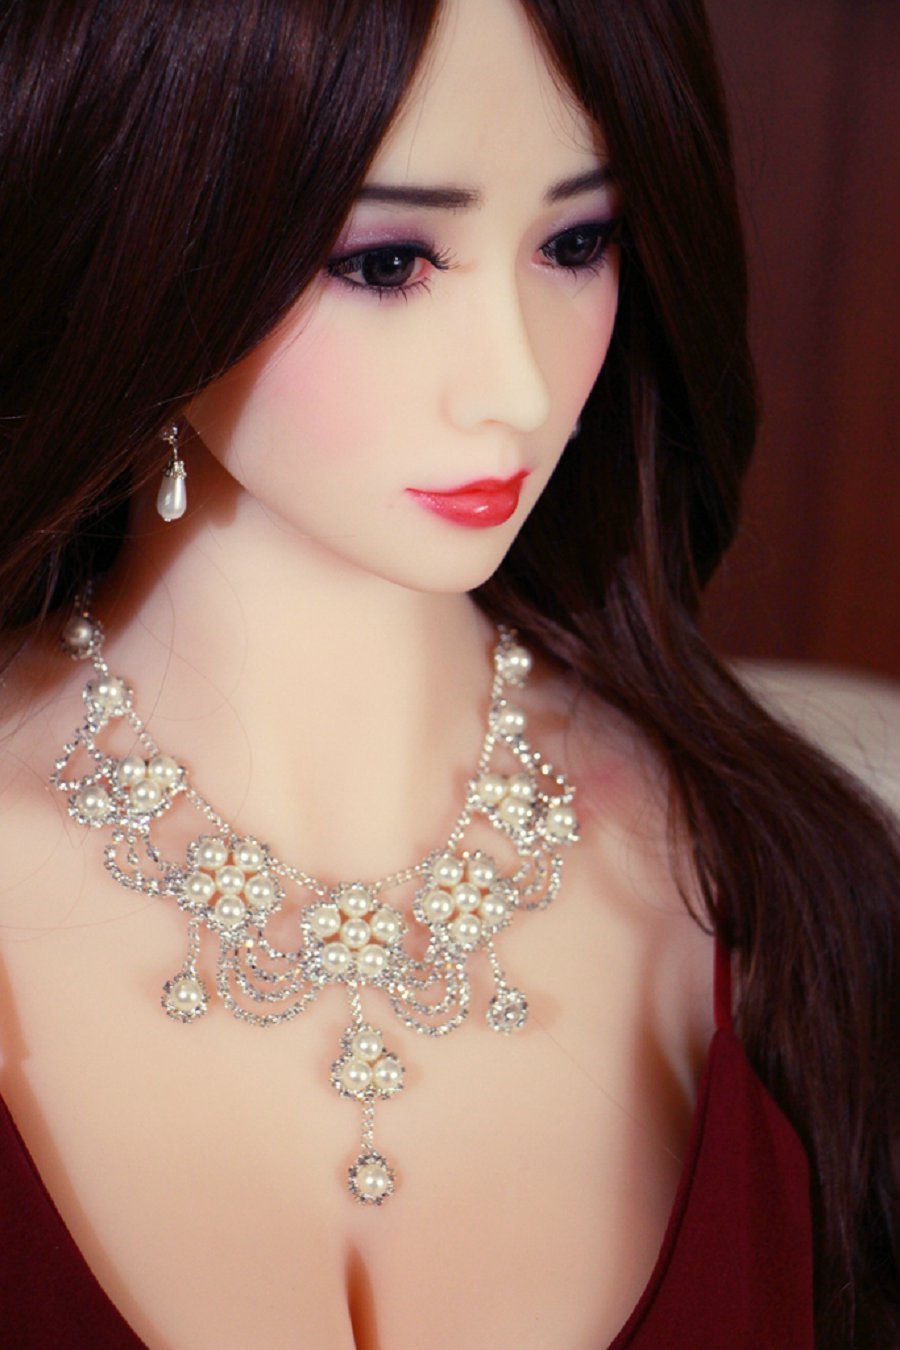 AF Doll 158cm Asian noble lady TPED mid-chest sex doll Heshu-DreamLoveDoll